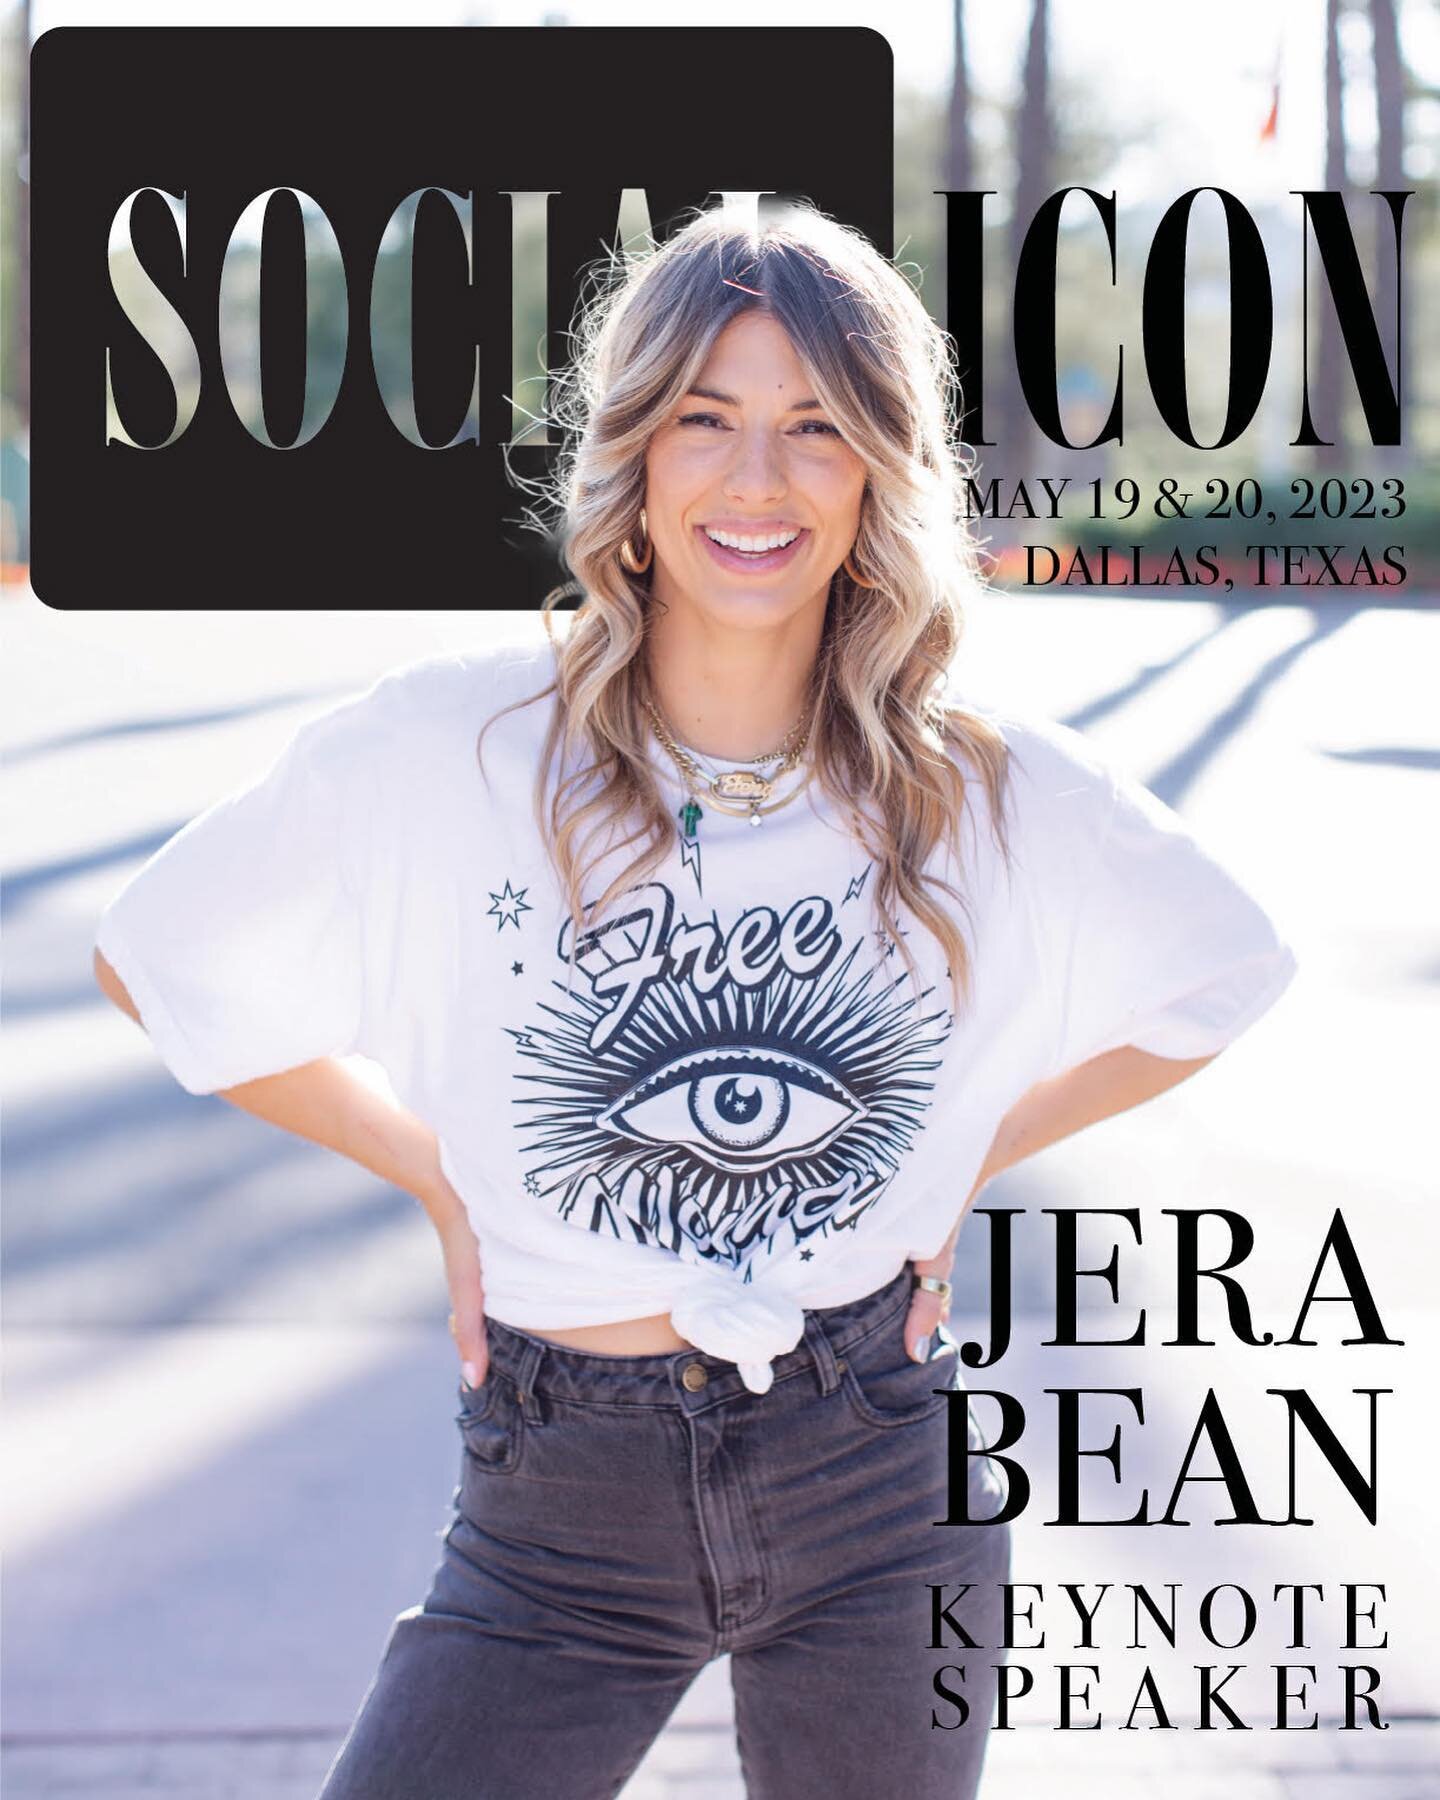 SO gosh darn EXCITED to be the opening keynote at @_socialicon this Friday, May 19 in Dallas, TX! 🤩 🎤 I&rsquo;ll be speaking about one of my favorite topics: The Secret Sauce of Social Media: How to Show Up Authentically.

And hey&hellip; you can g